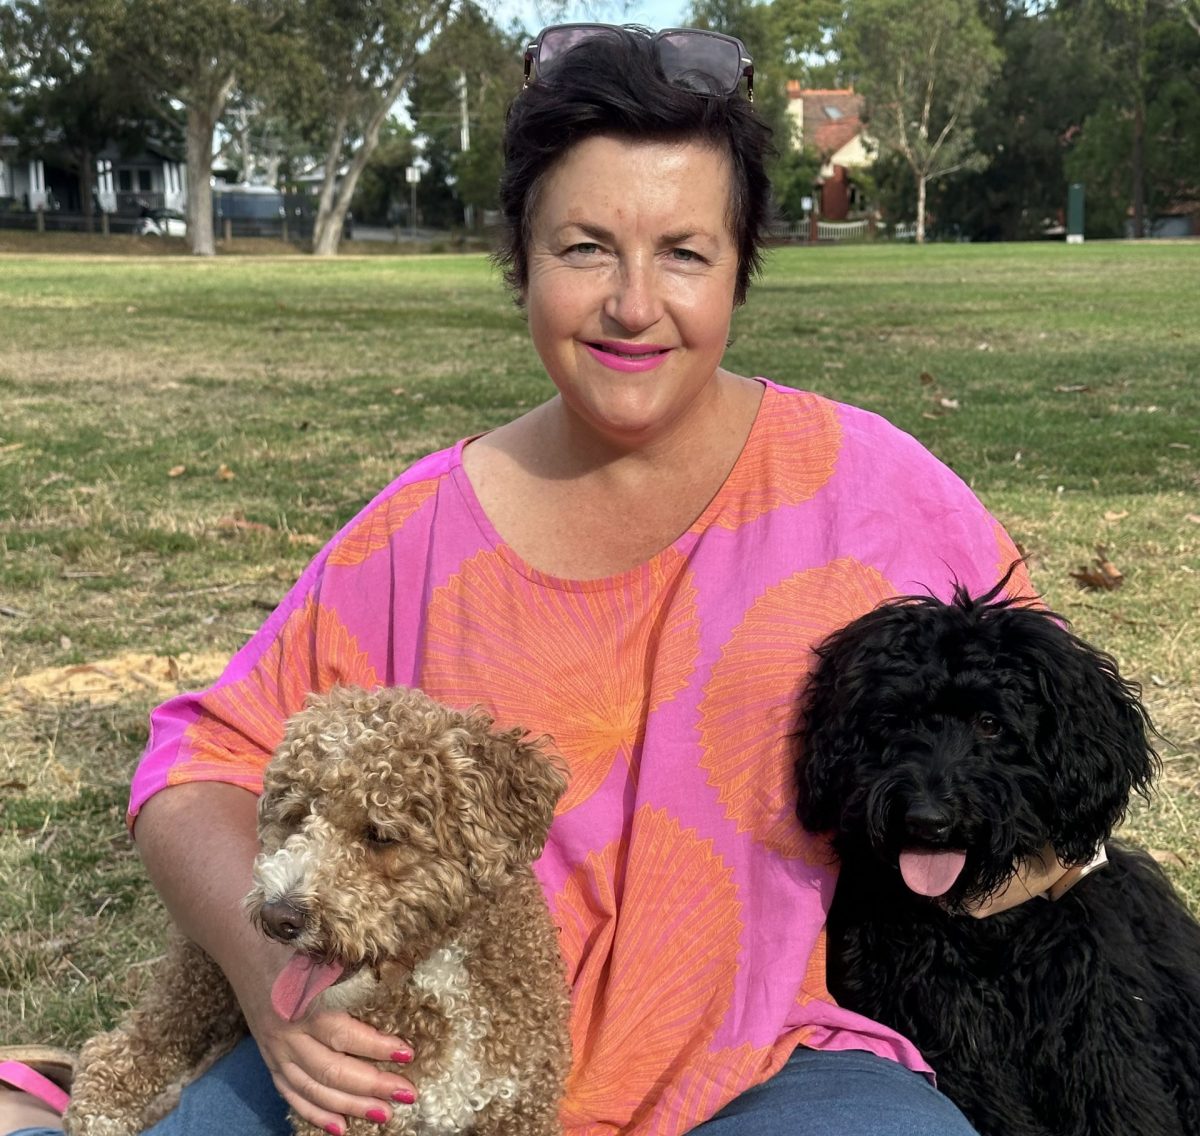 When Cynthia Mahoney is not inspiring women through her motivational talks, she's enjoying time out with her beloved pooches Alfie and Maggie.